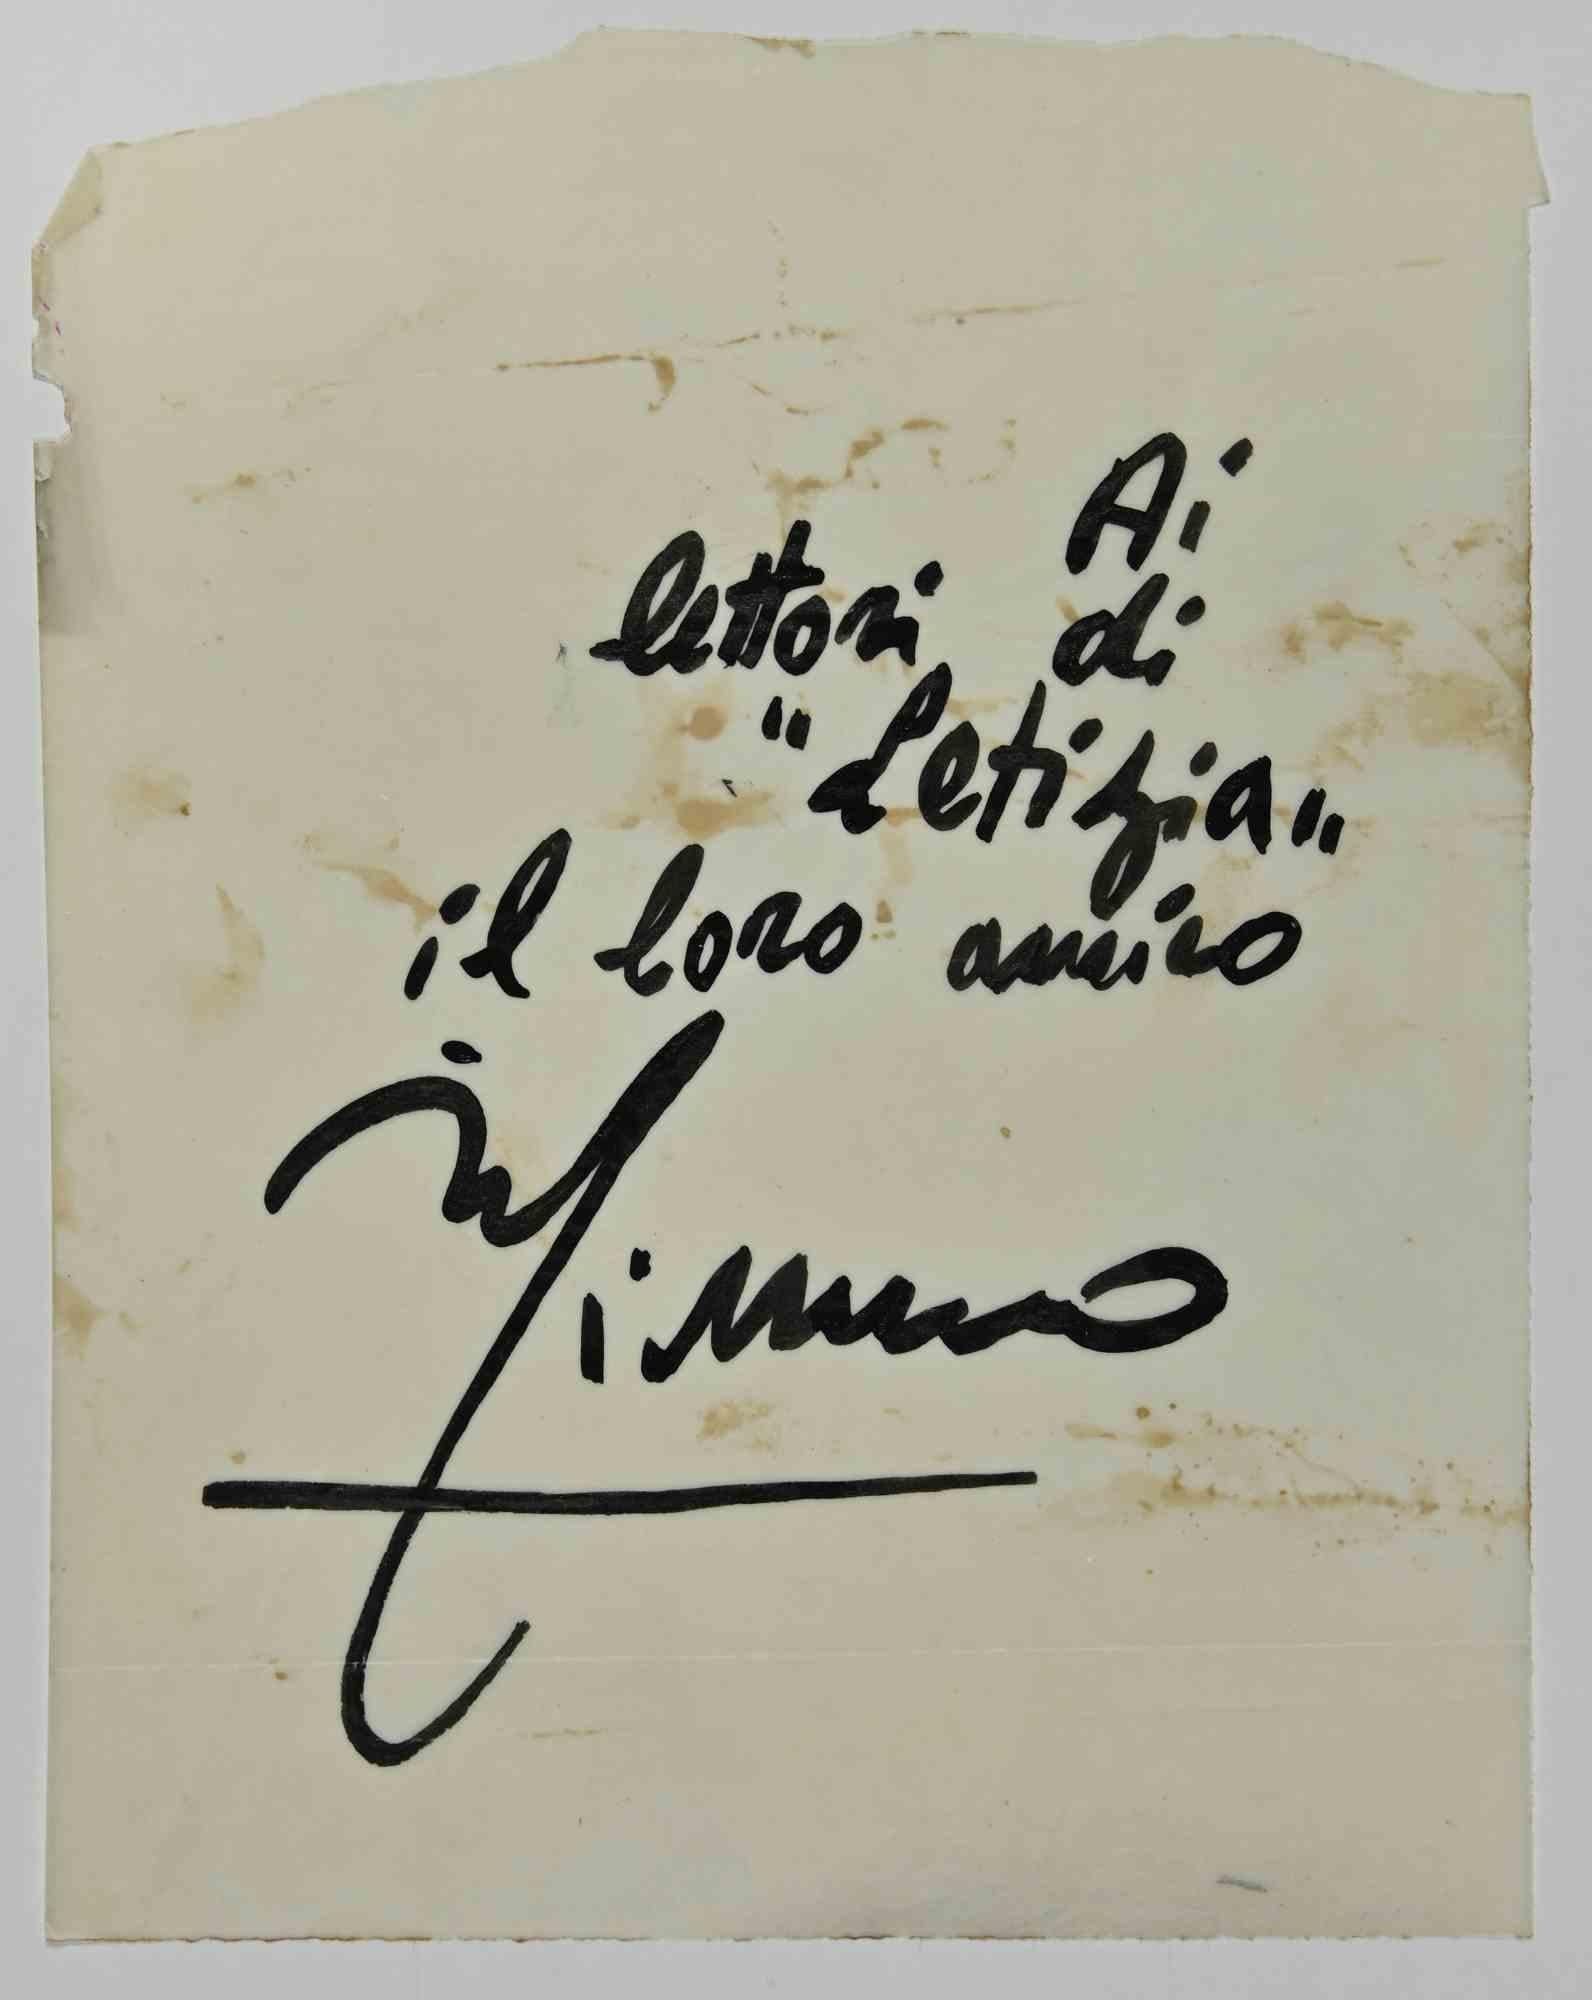 Autograph- To the readers of "Letizia" is an autograph by the italian singer Domenico "Mimmo" Modugno, author of the famous song "volare". On transparent paper, realized in the 1970s.

Hand-signed.

Good conditions with aged margins and cutting.